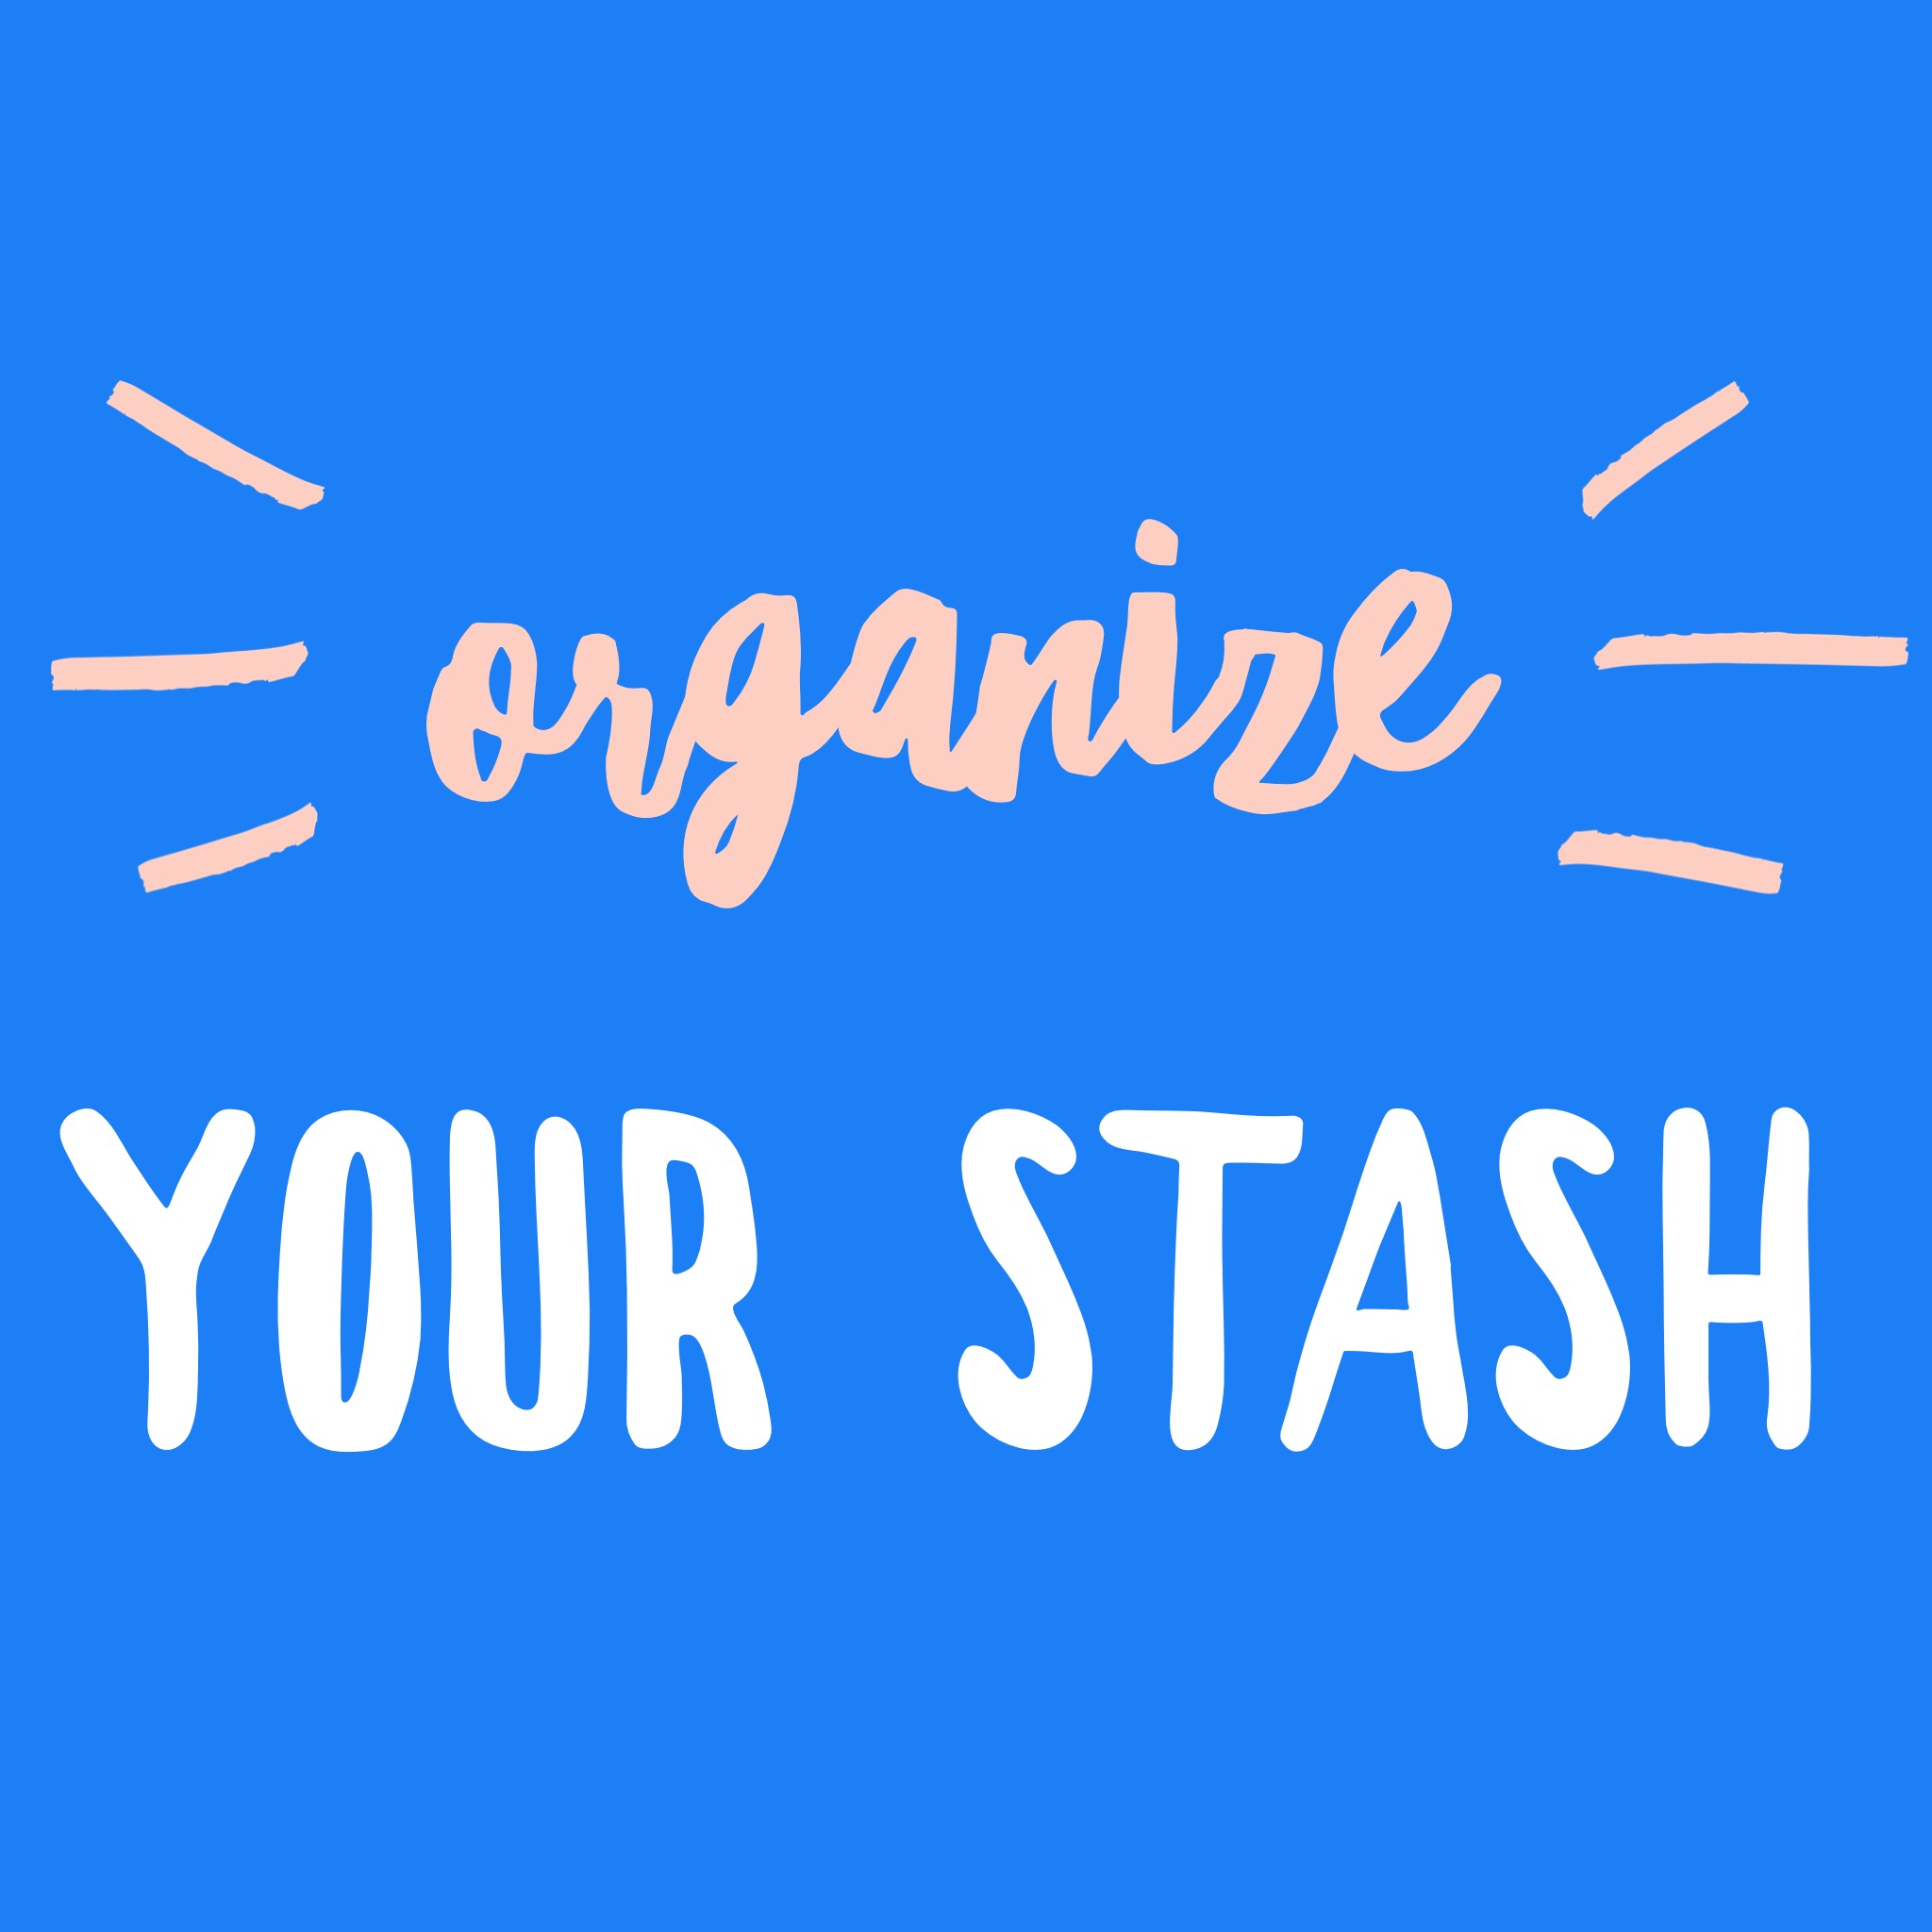 How to Organize Your Stash: Real Tips from Real Crafters